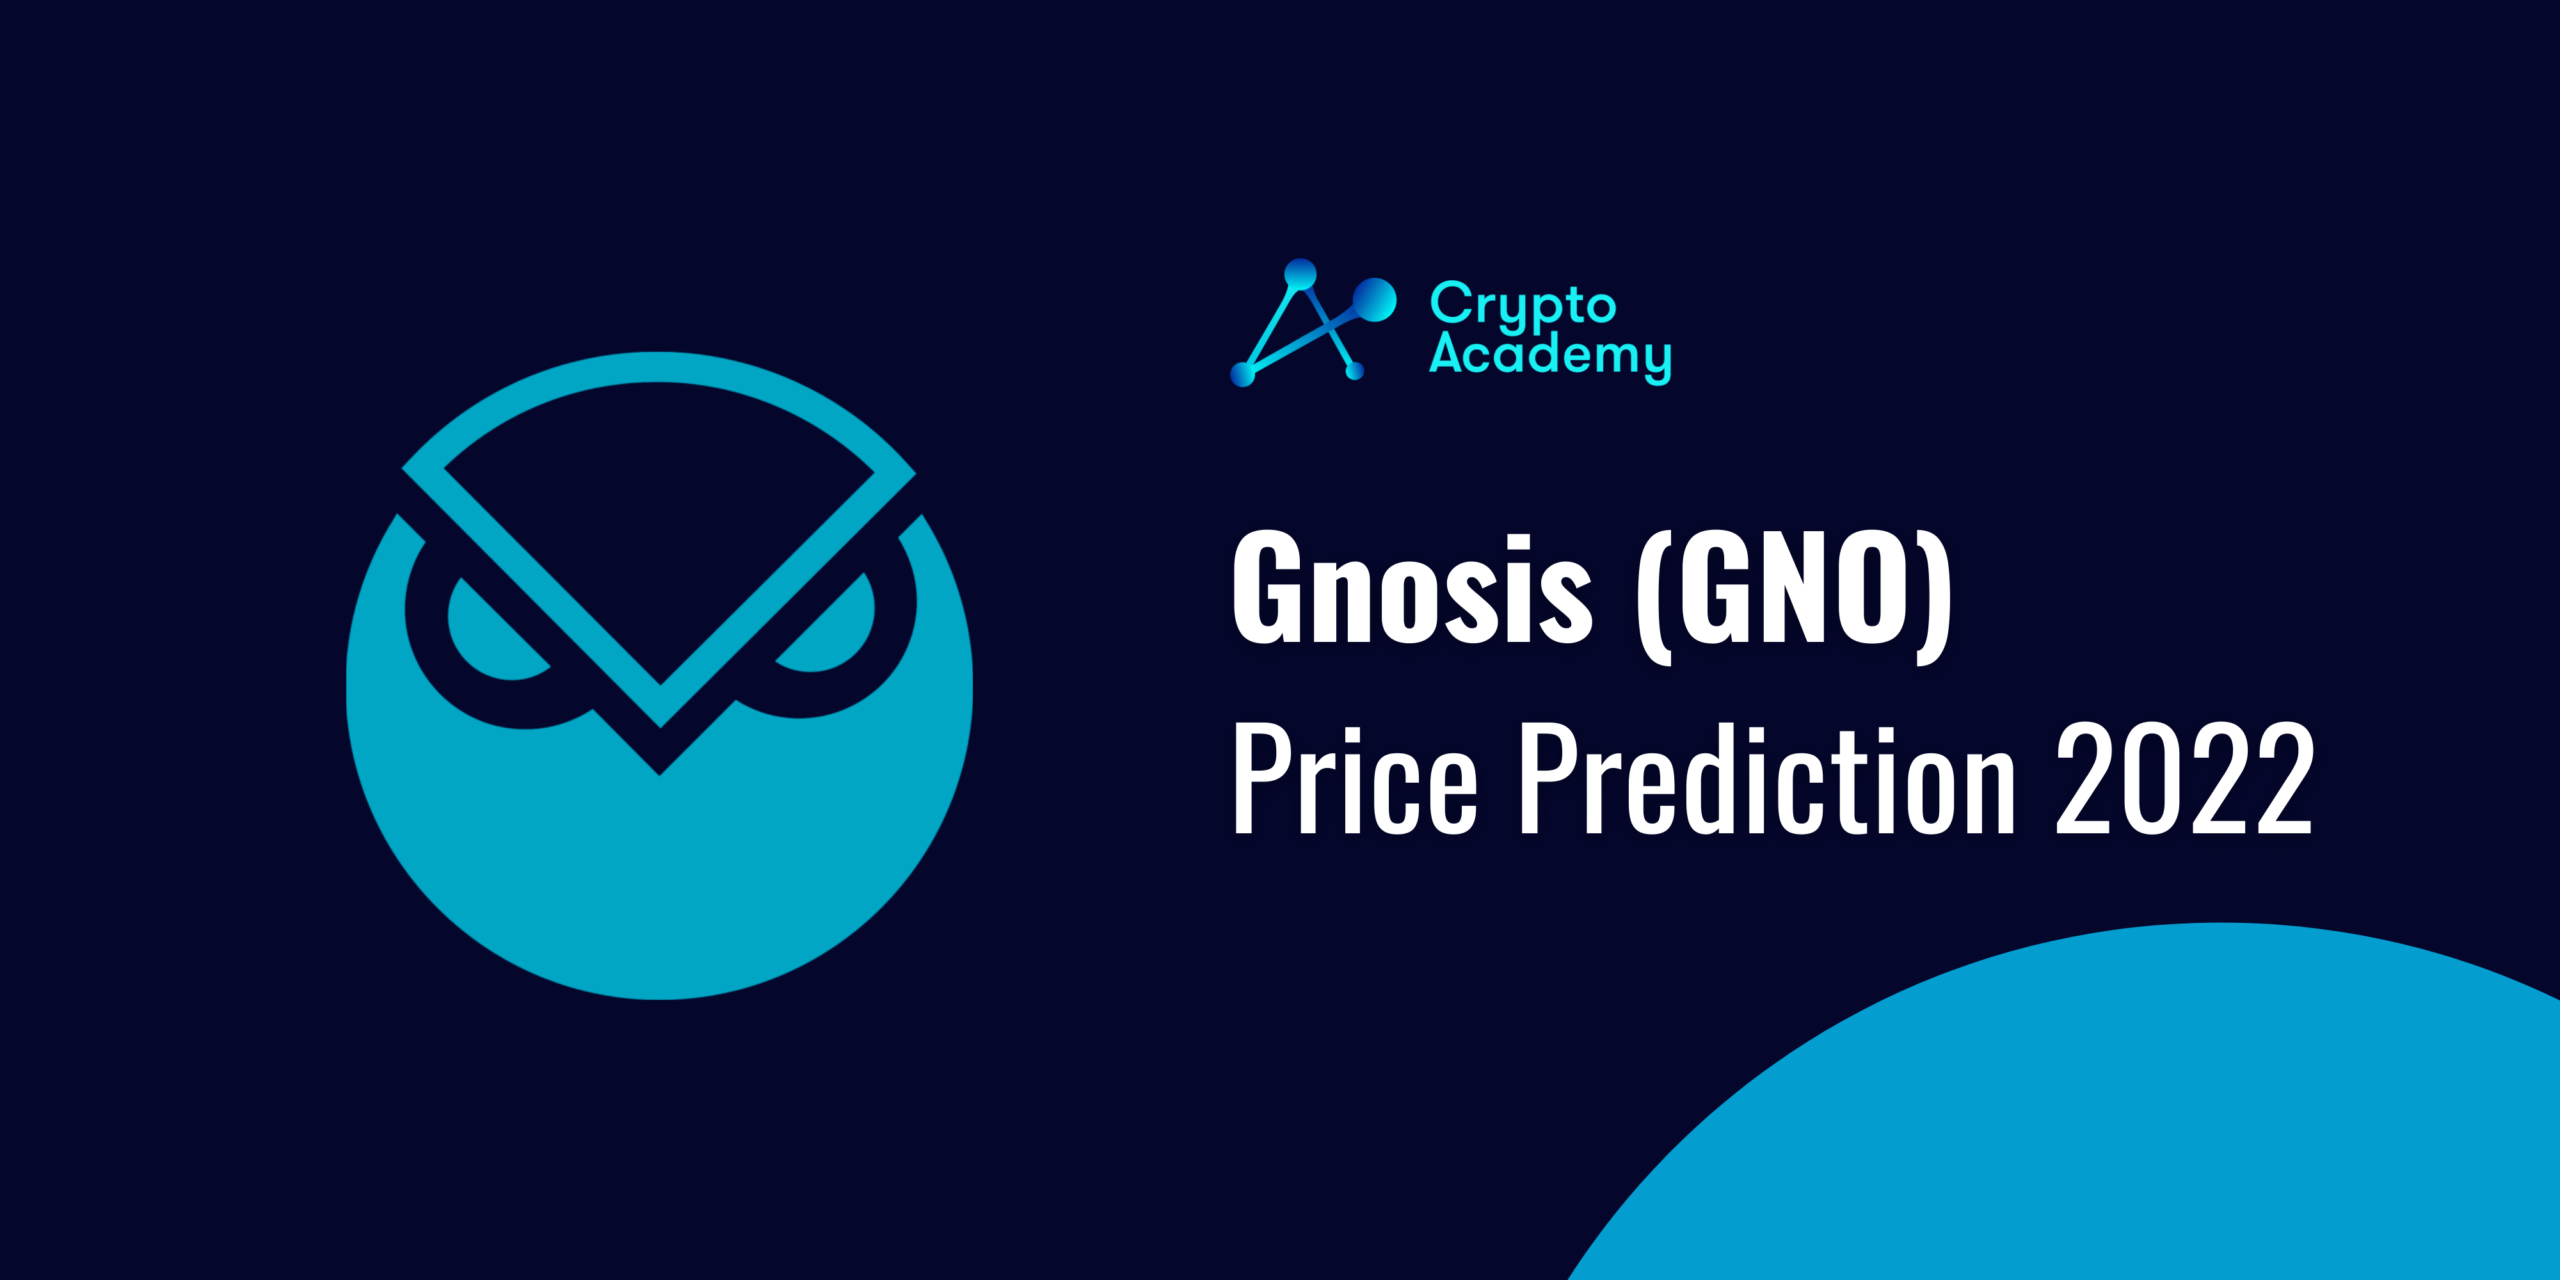 Gnosis Price Prediction 2022 and Beyond - Will GNO Reach $1,000?